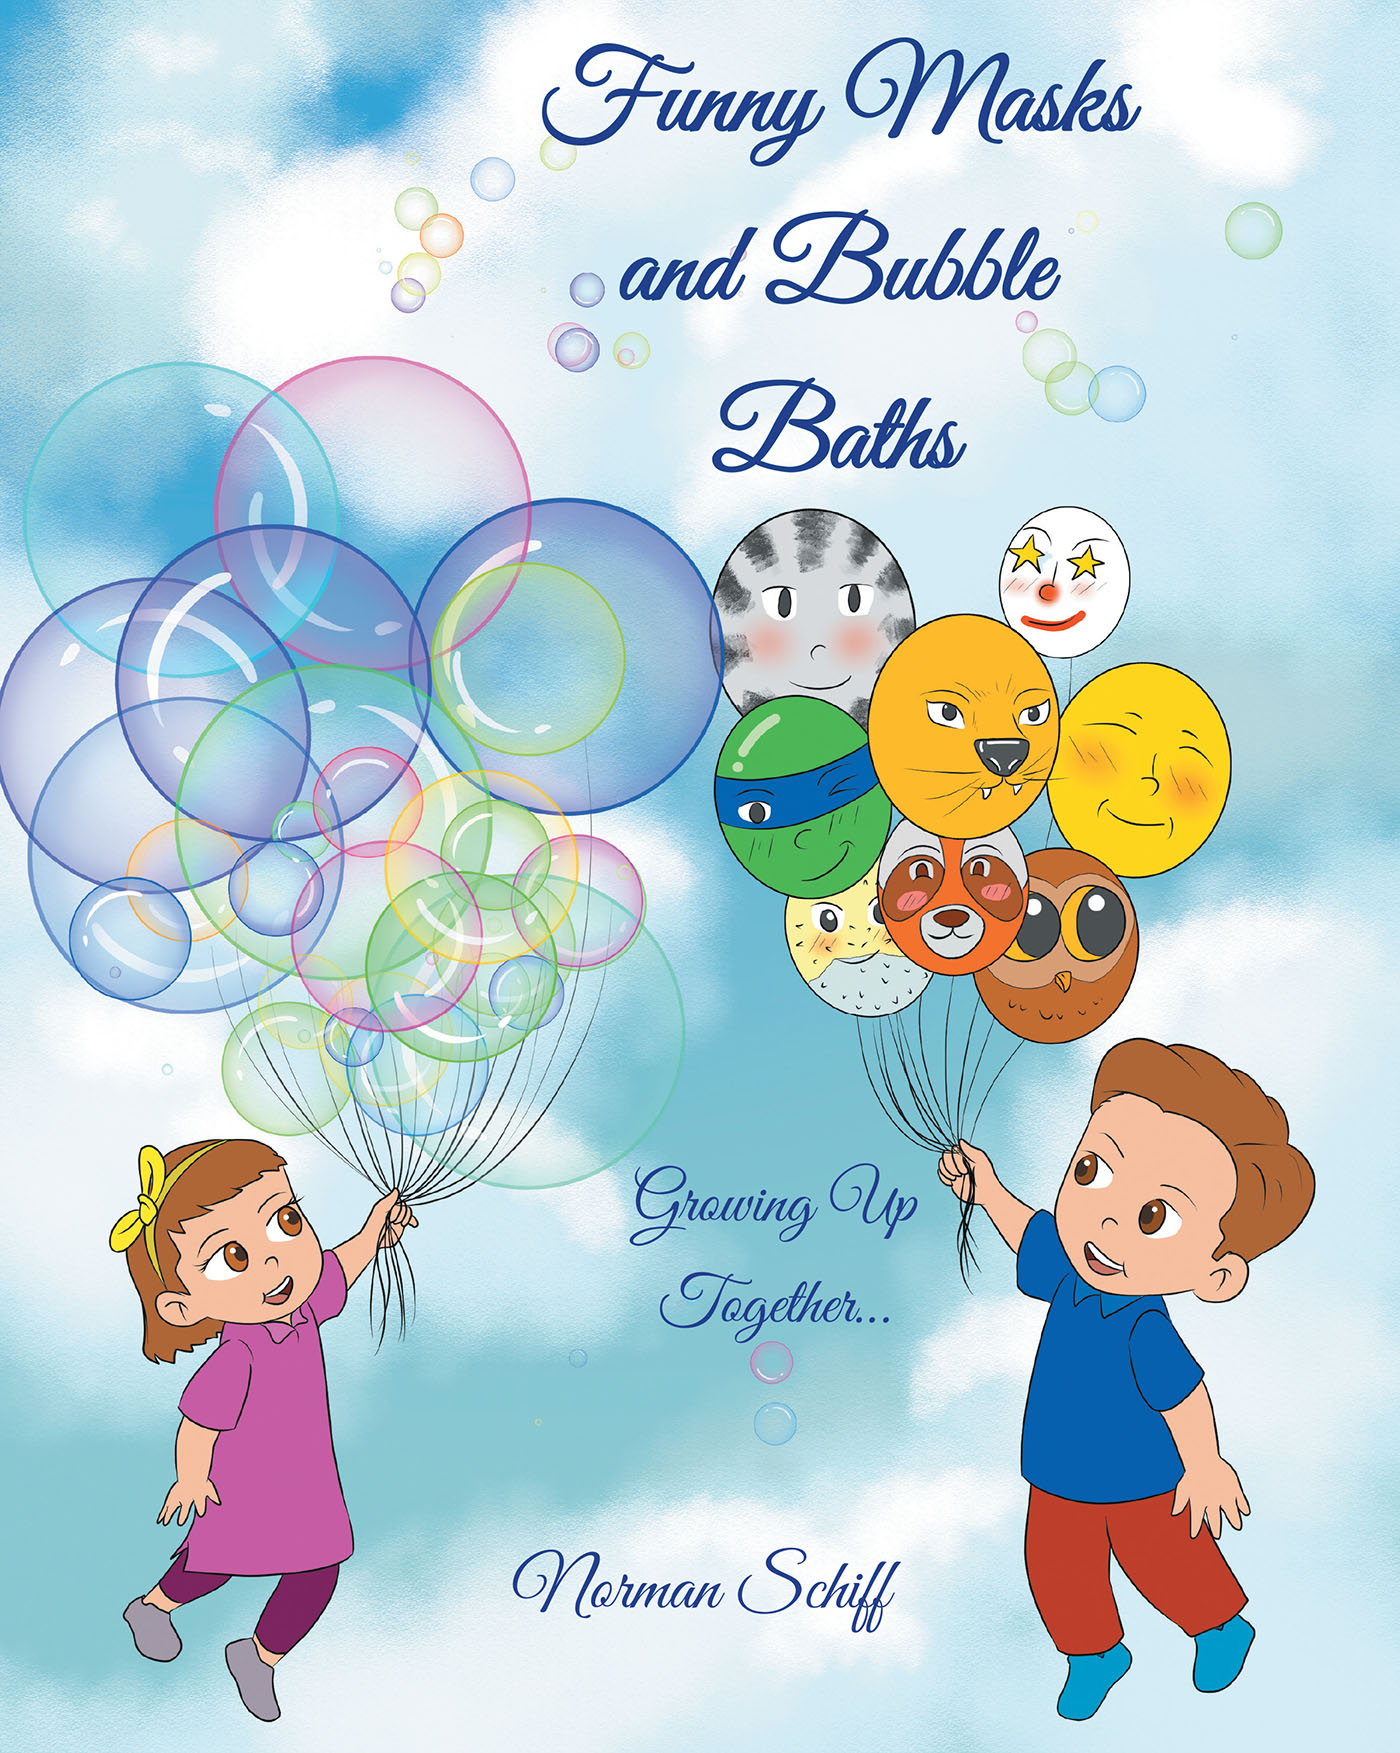 Author Norman Schiff’s New Book, "Funny Masks and Bubble Baths: Growing Up Together," Explores the Tender Moments for Children to Look Back on When They're Grown Up